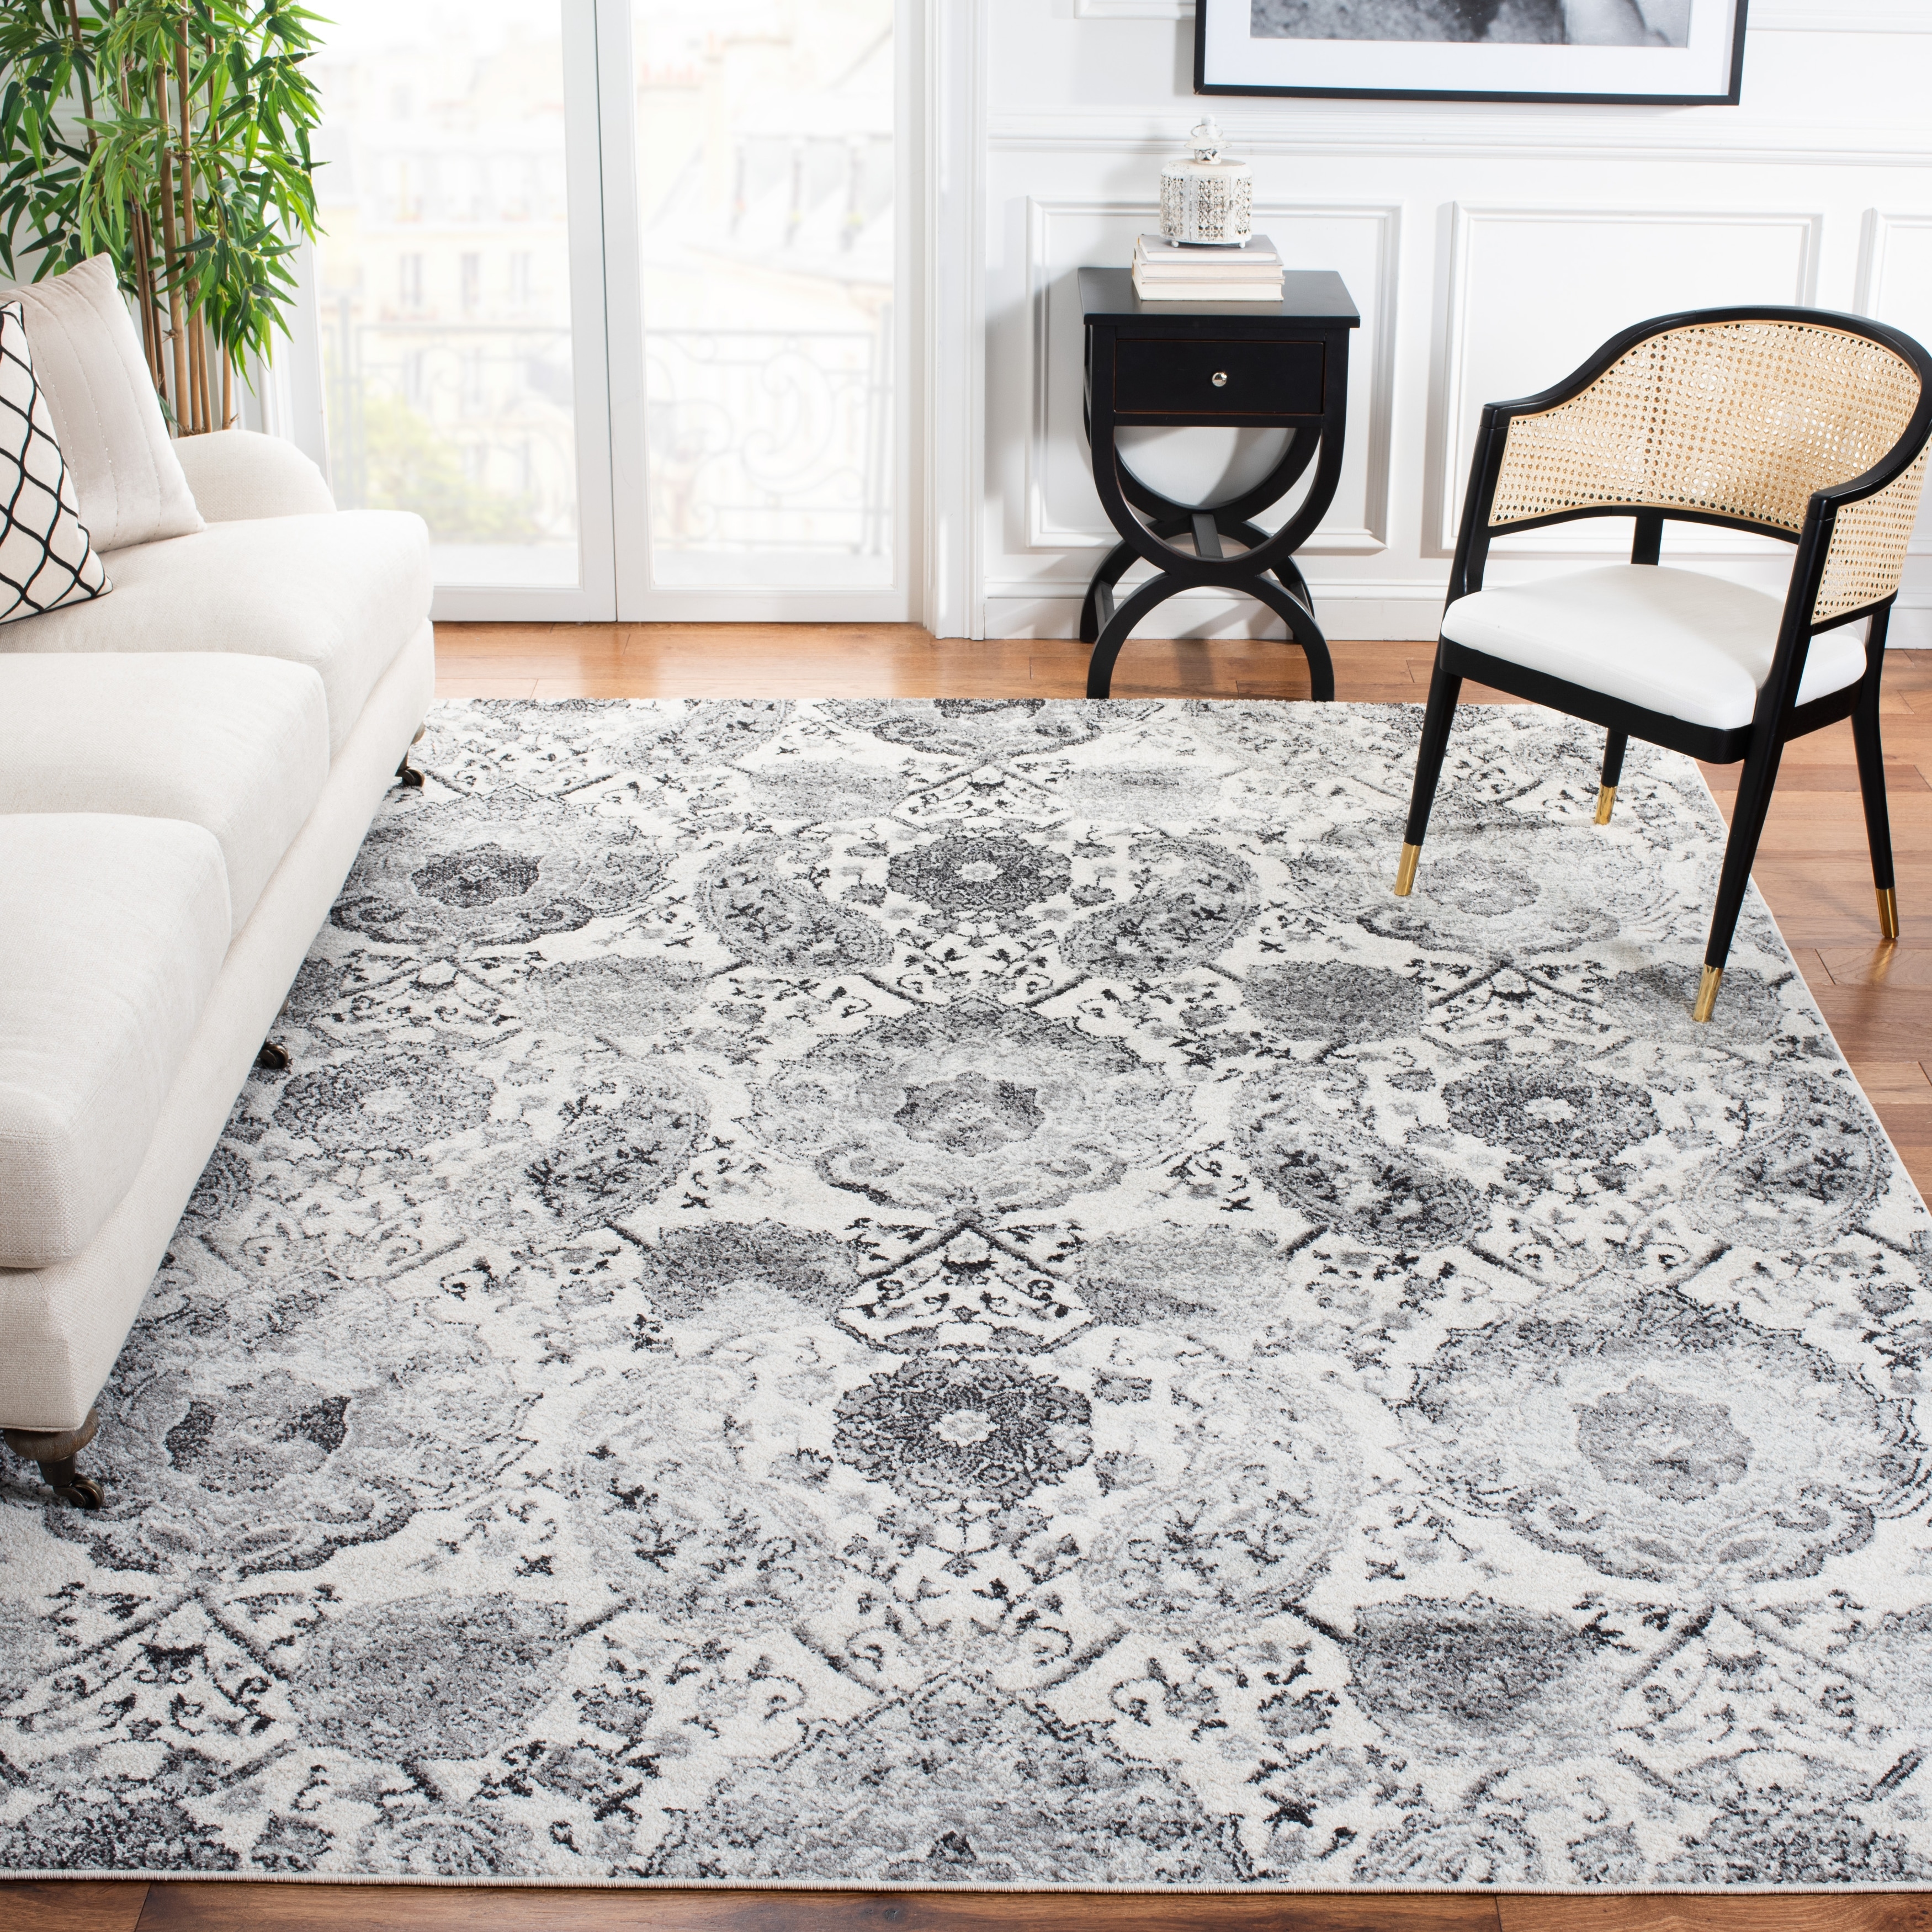 8' x 10' Cream Light Grey SAFAVIEH Madison Collection MAD600C Boho Chic Glam Paisley Non-Shedding Living Room Bedroom Dining Home Office Area Rug 